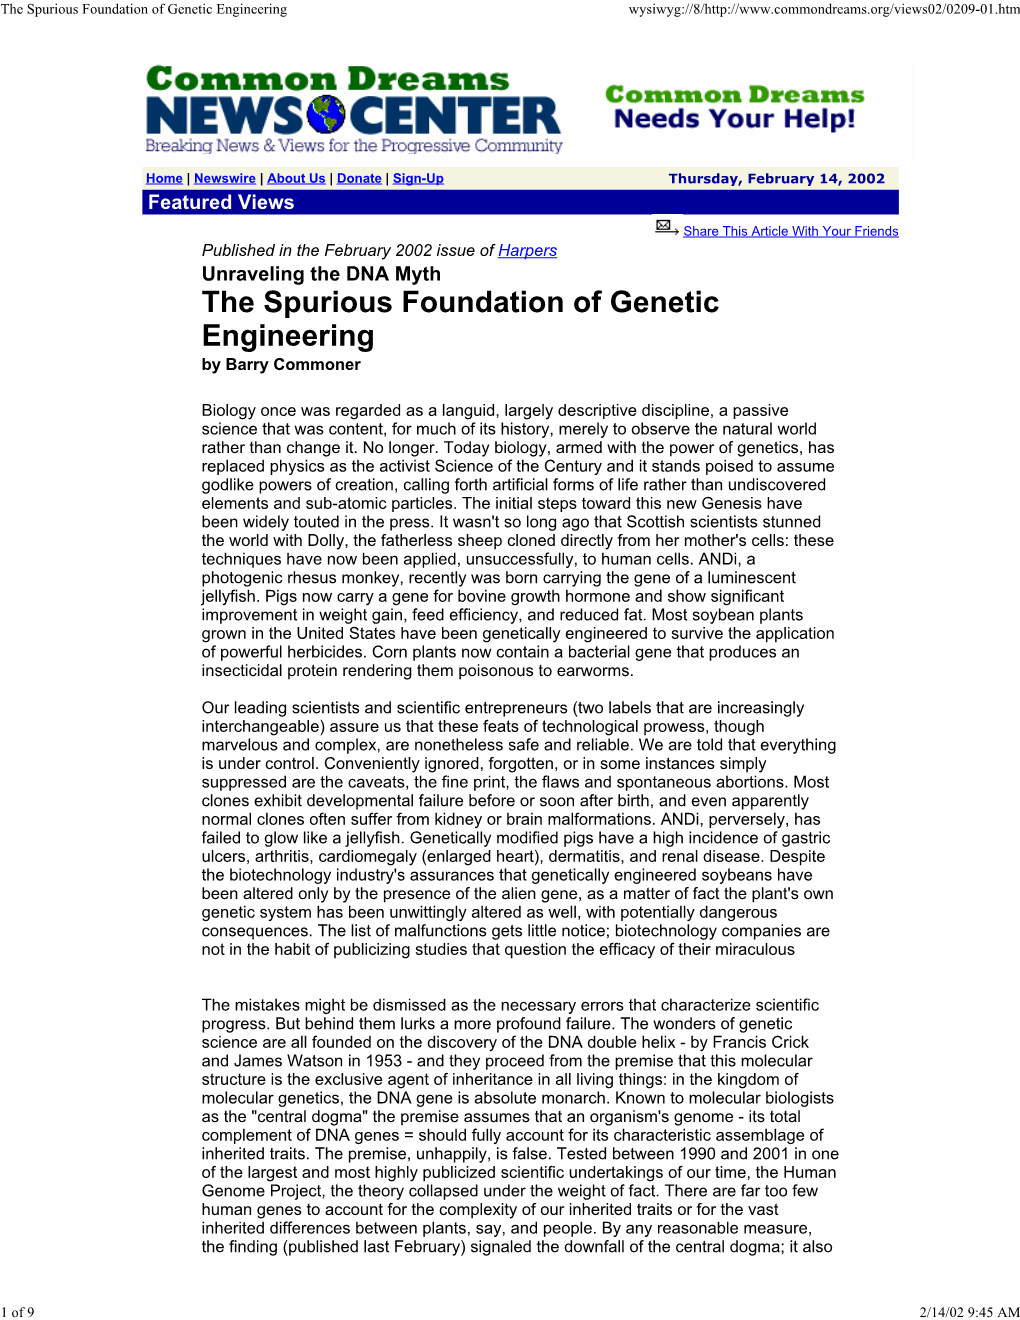 “The Spurious Foundation of Genetic Engineering